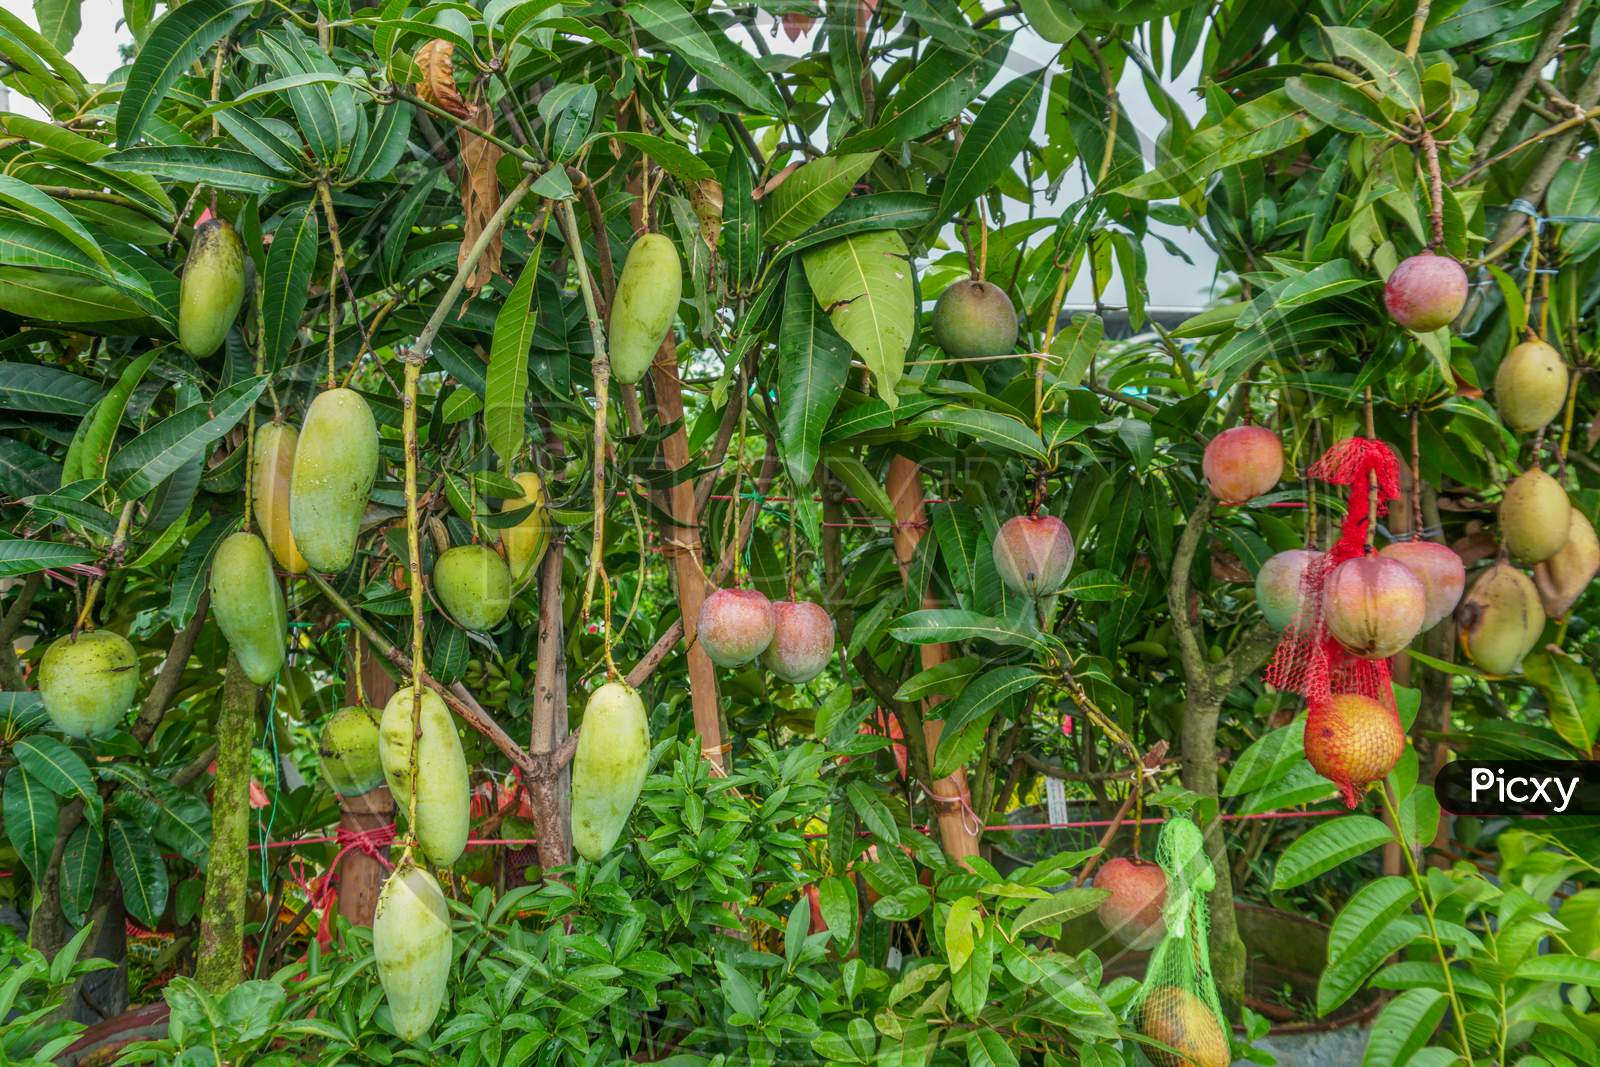 A Beautiful Mango Hanging On The Mango Tree. This Is A Delicious Fruit. Mango Is Very Dear To All The People Of The World.